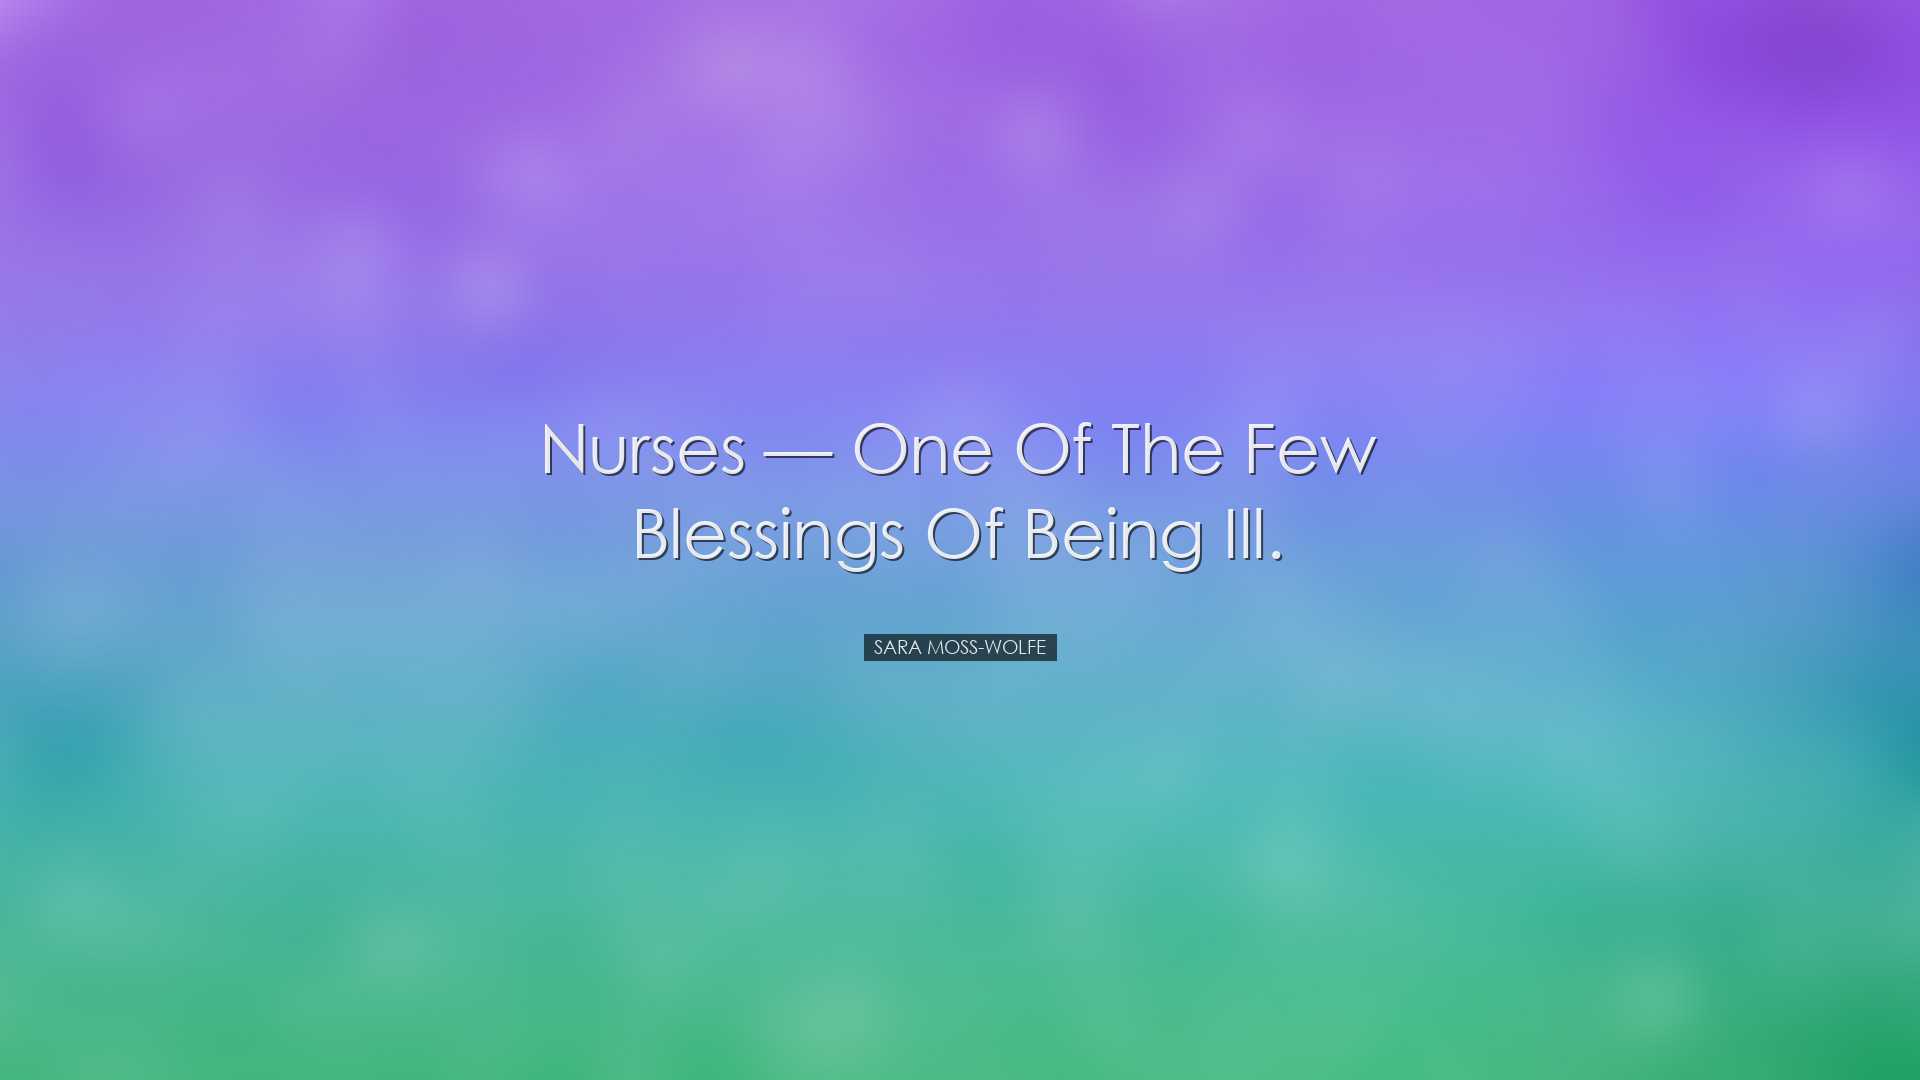 Nurses — one of the few blessings of being ill. - Sara Moss-